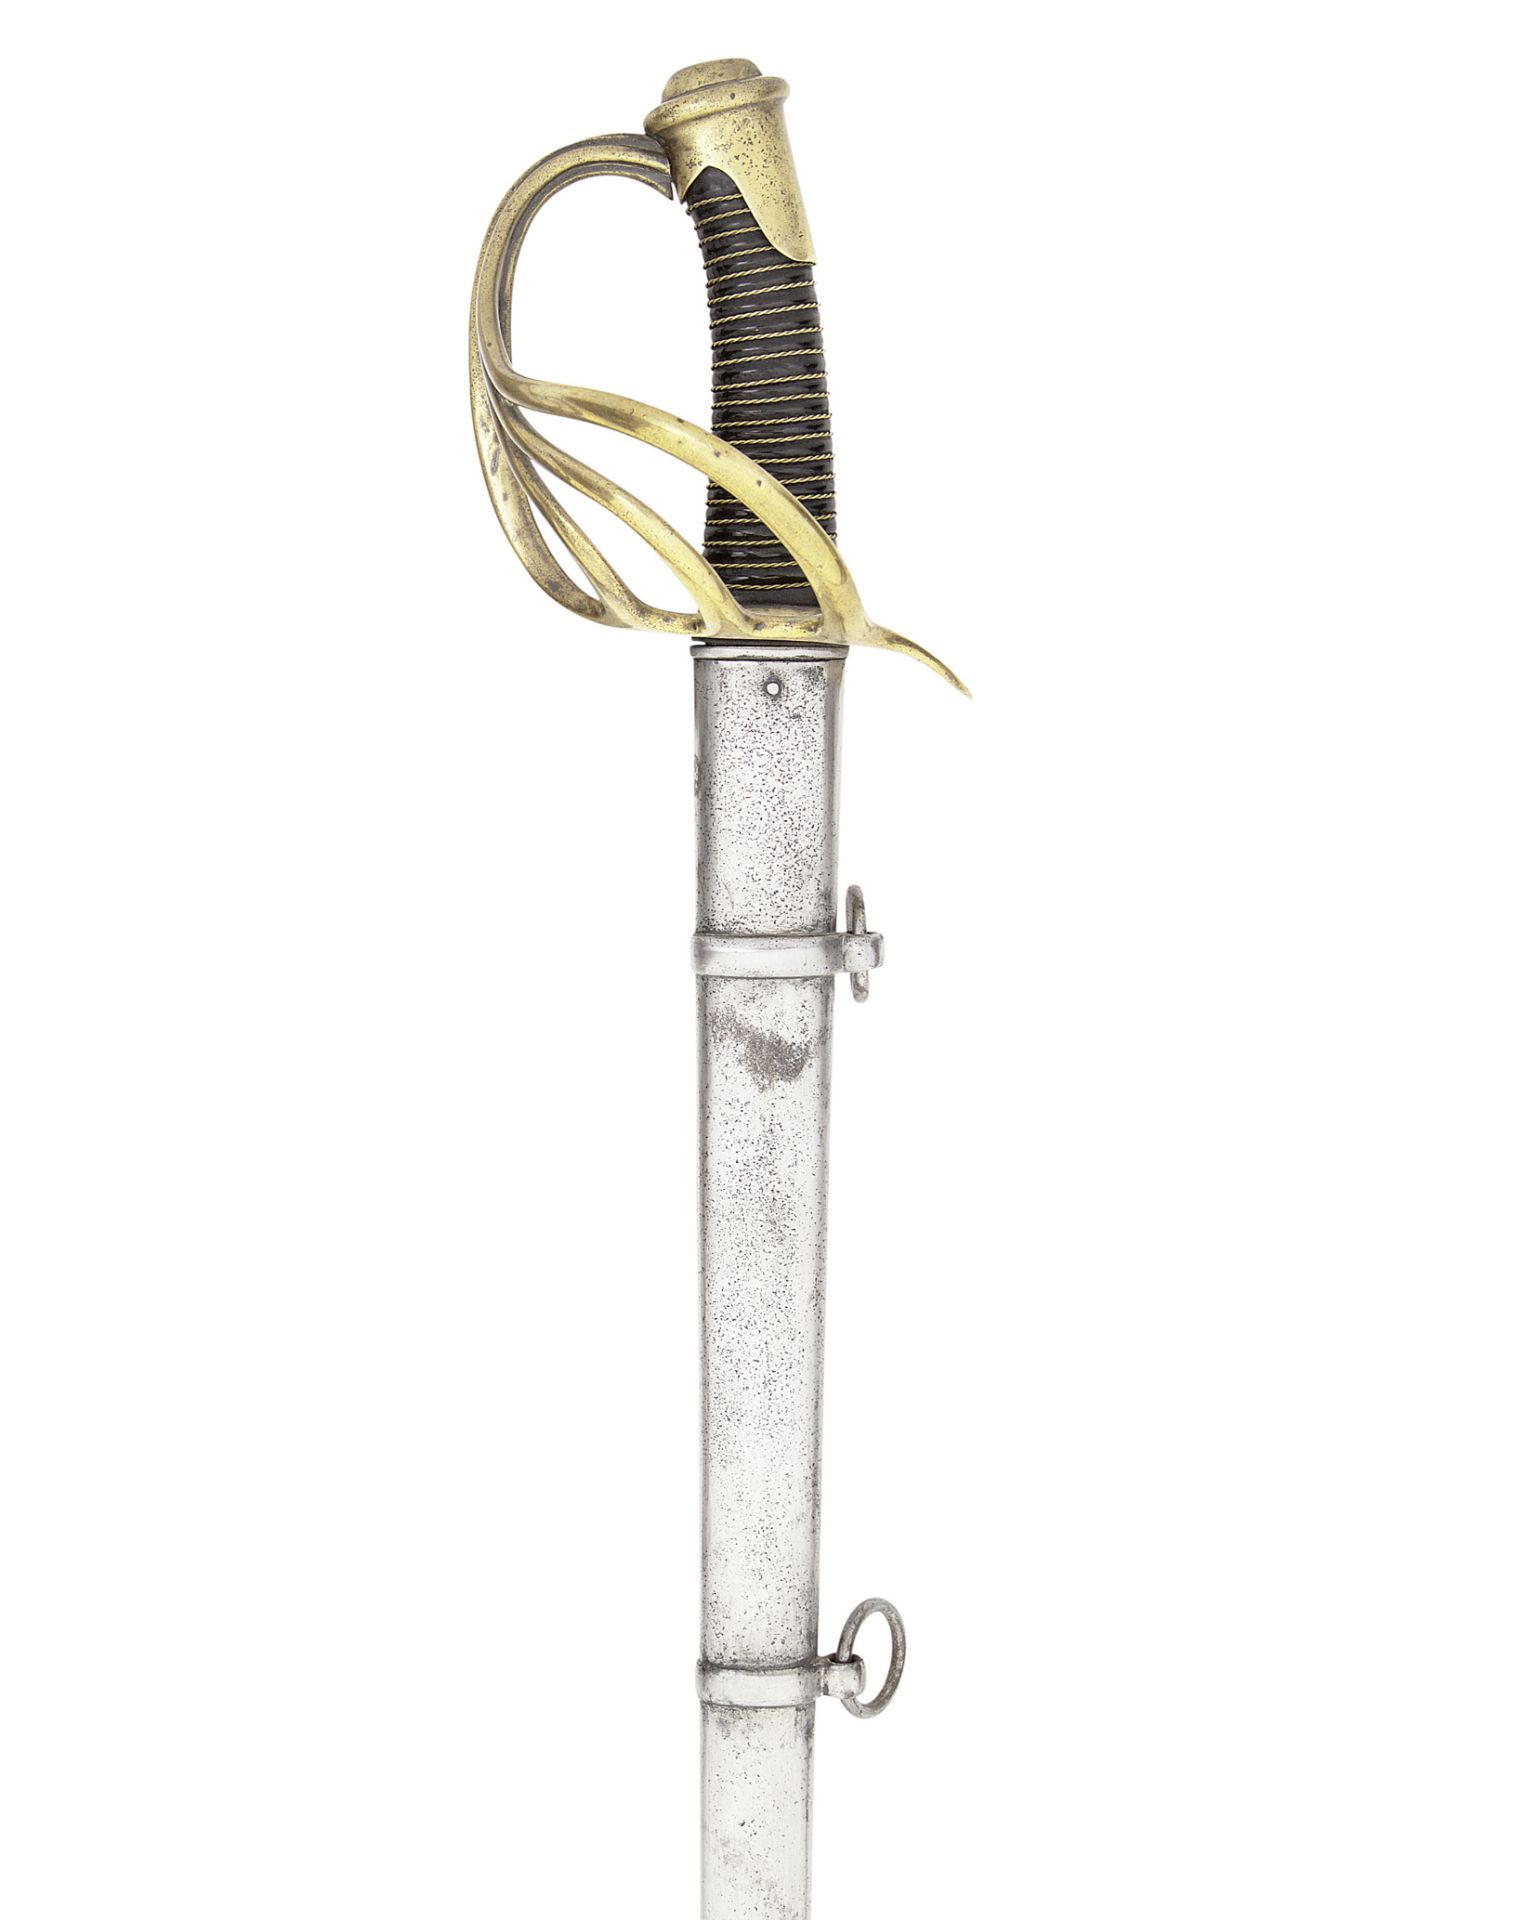 A French 1816 Model Cuirassier's Sword